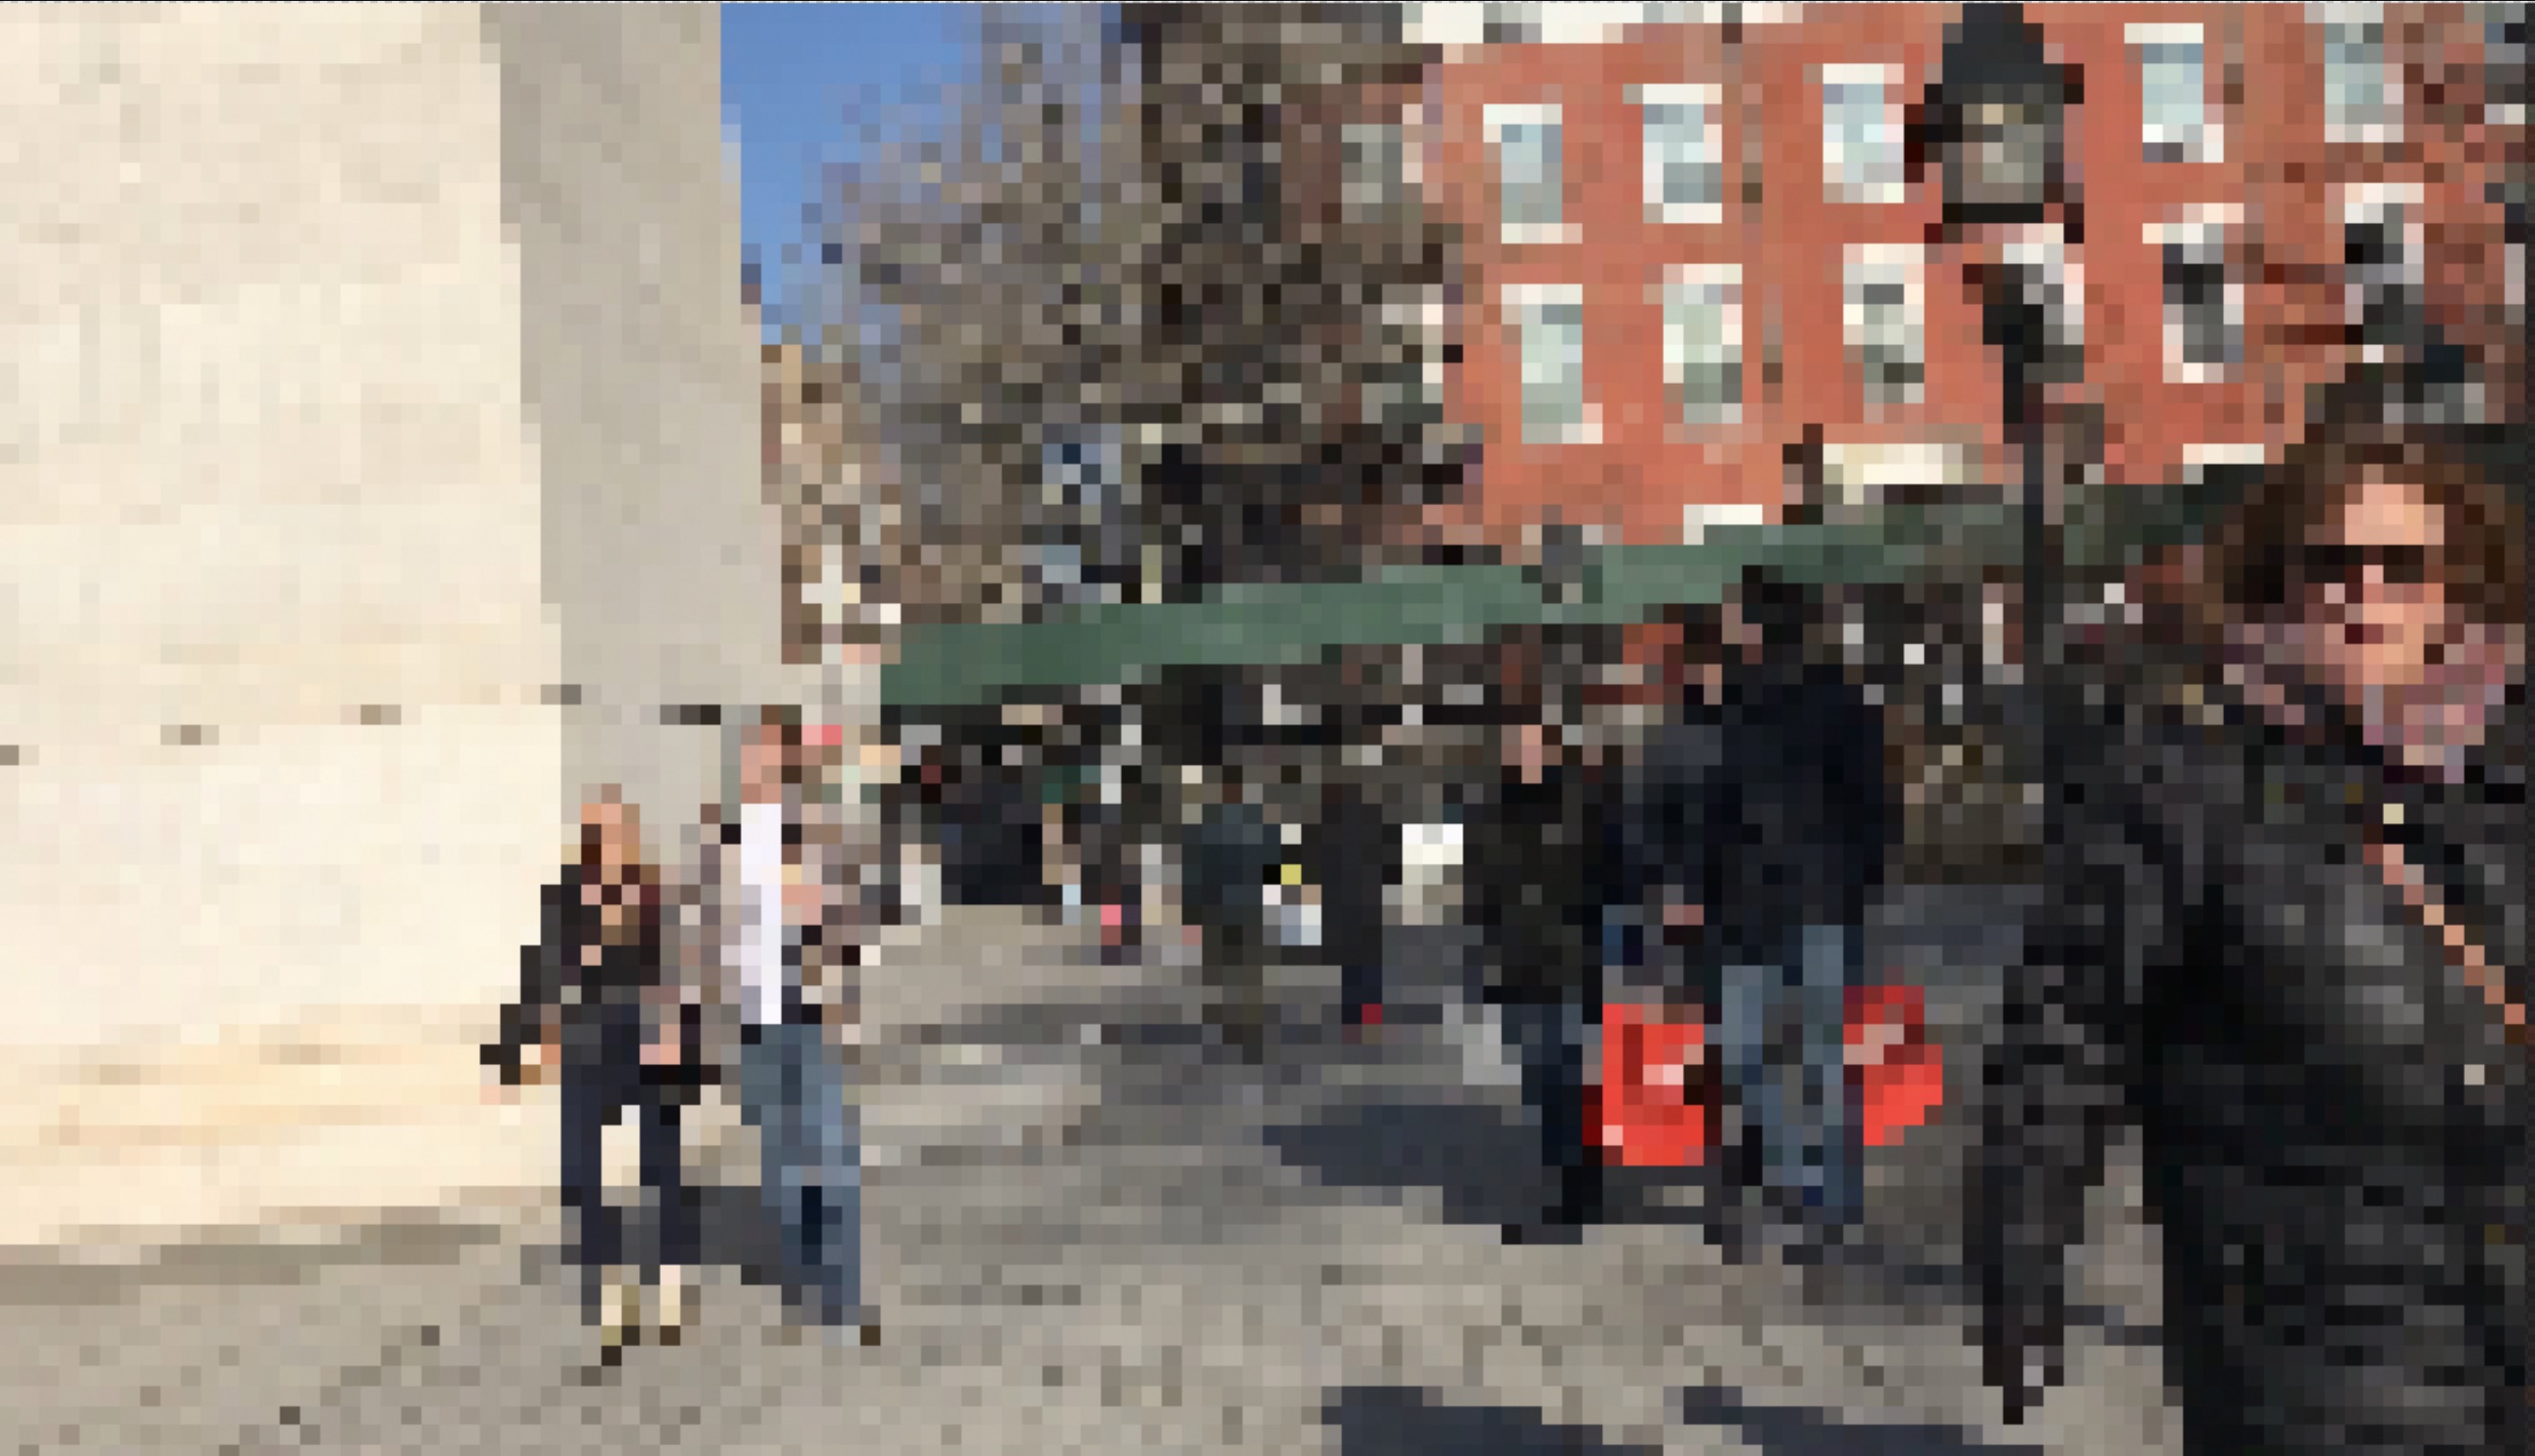 A pixelated photo that includes part of an arc from Washington Square Park, a couple by the arc, and a woman with sunglasses